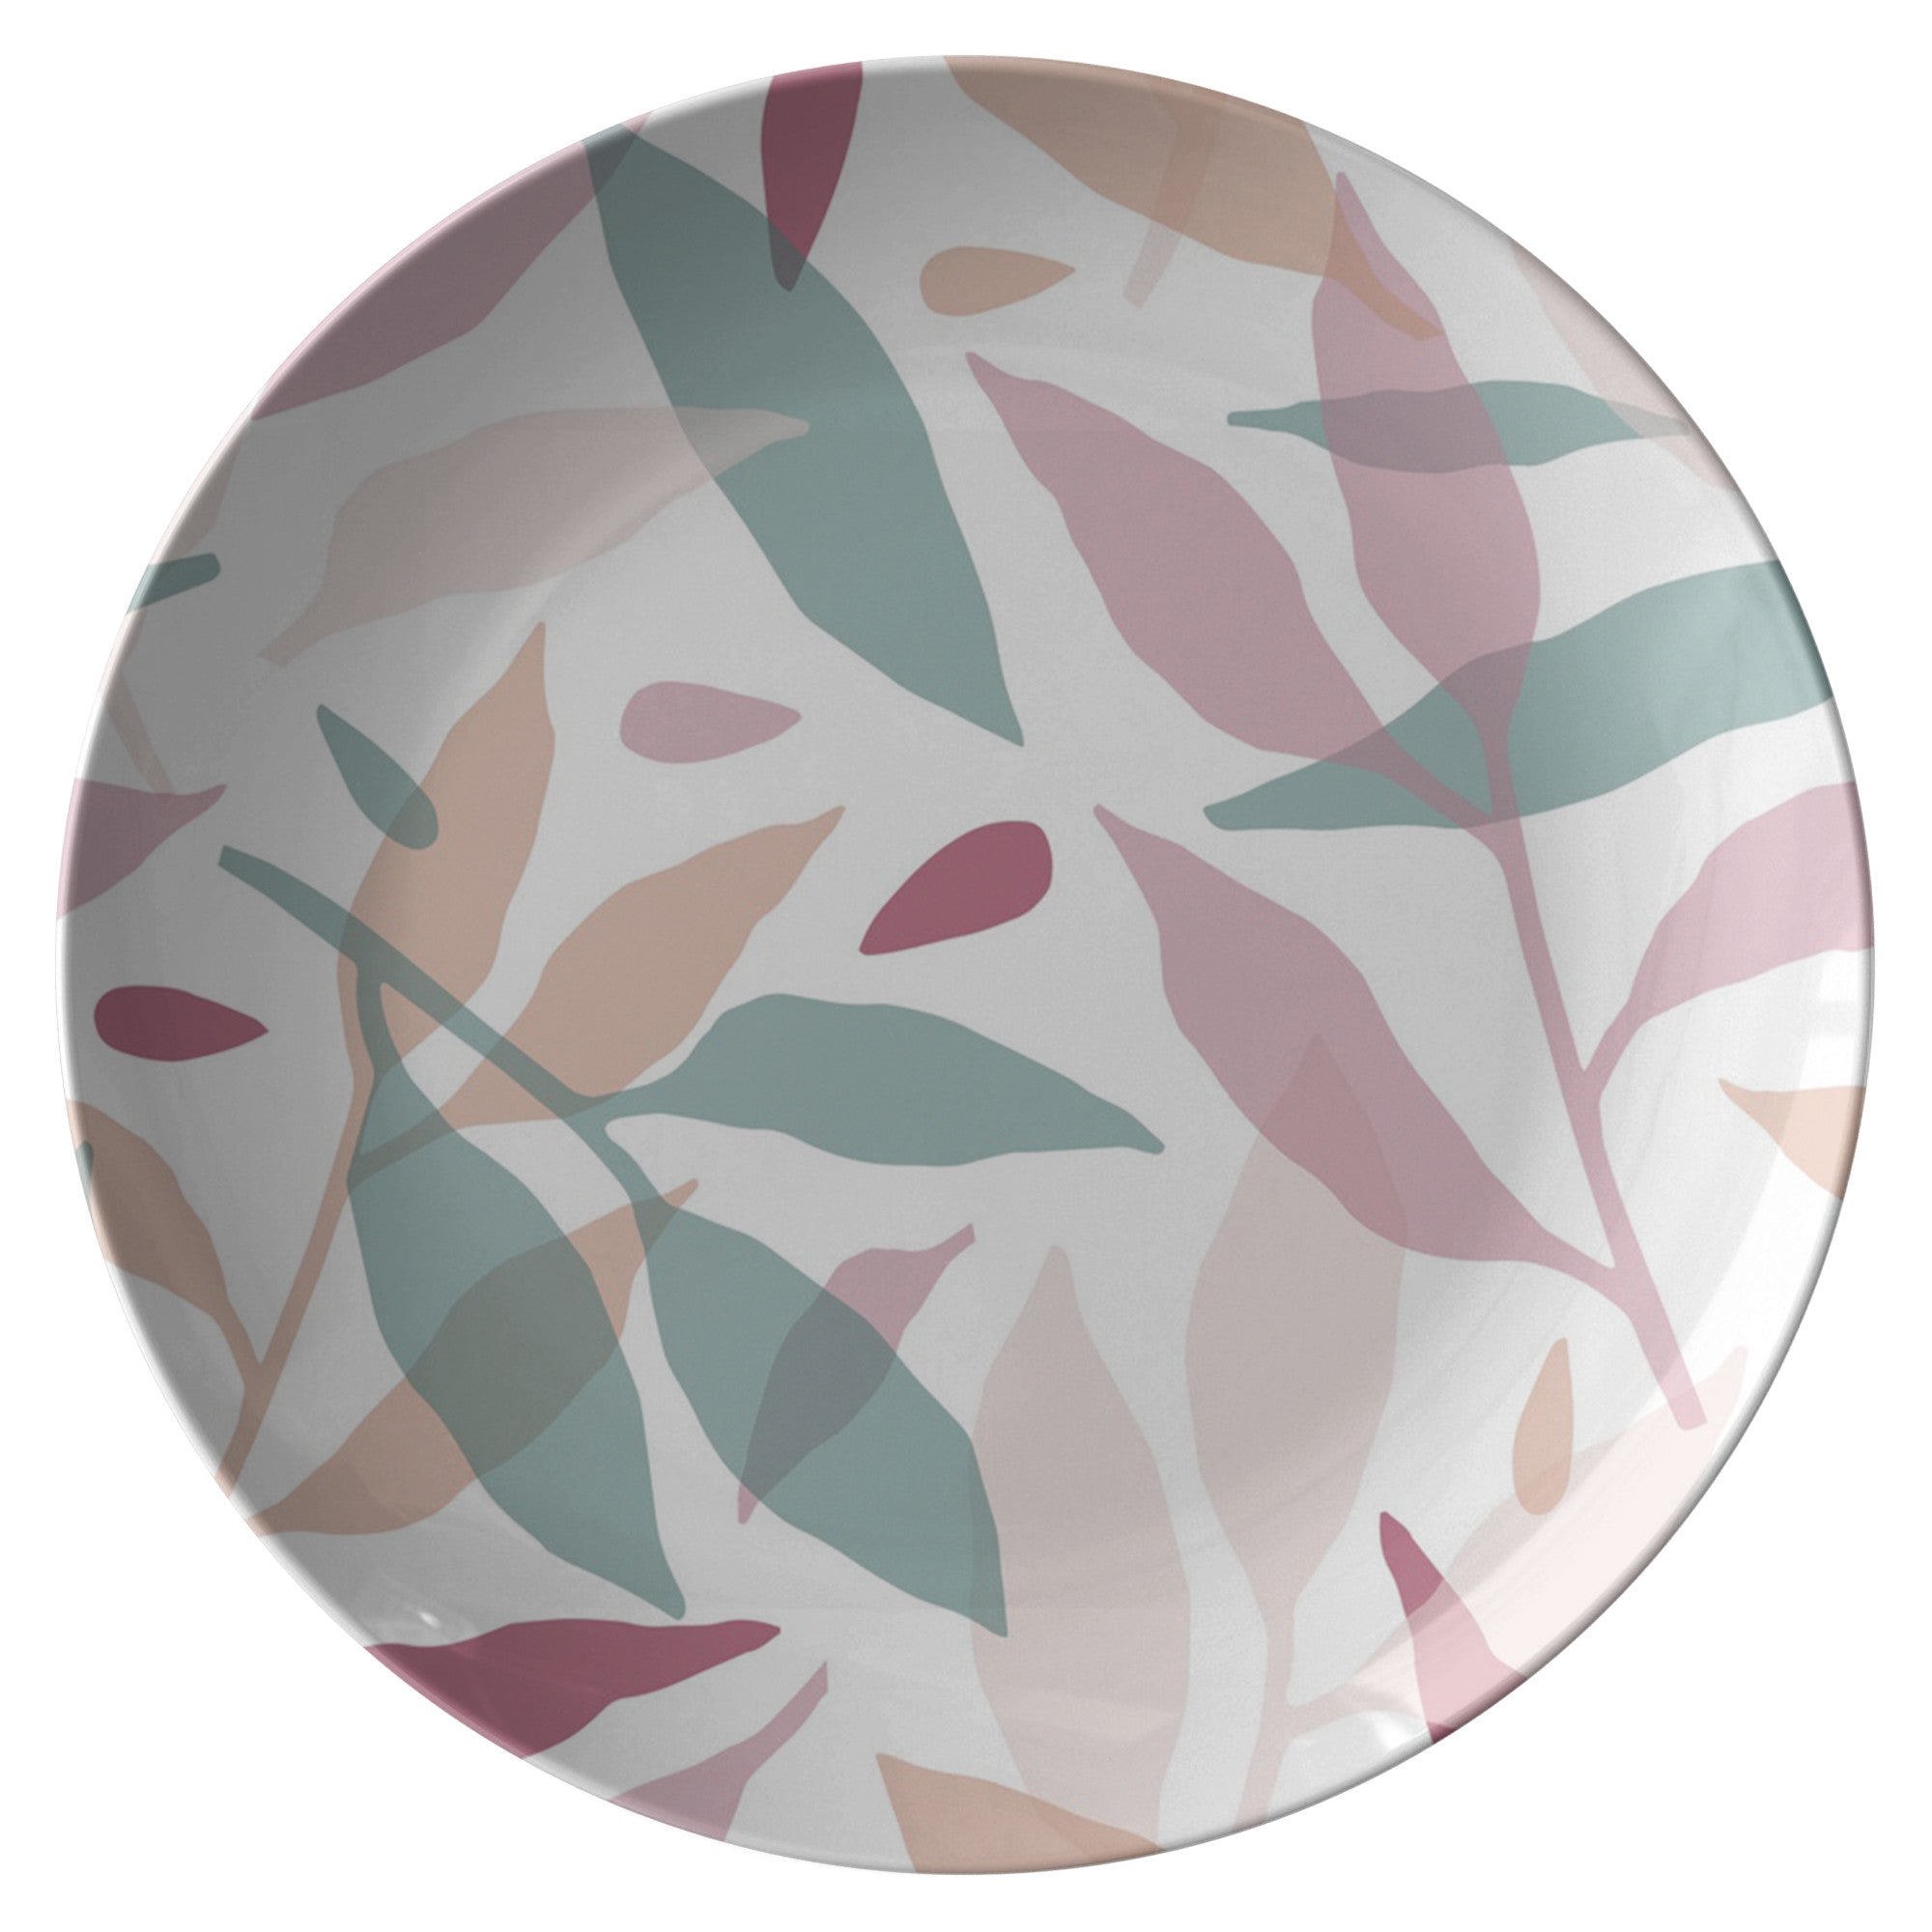 Printed Polymer Dinner Plate - Botanicals in Mauve